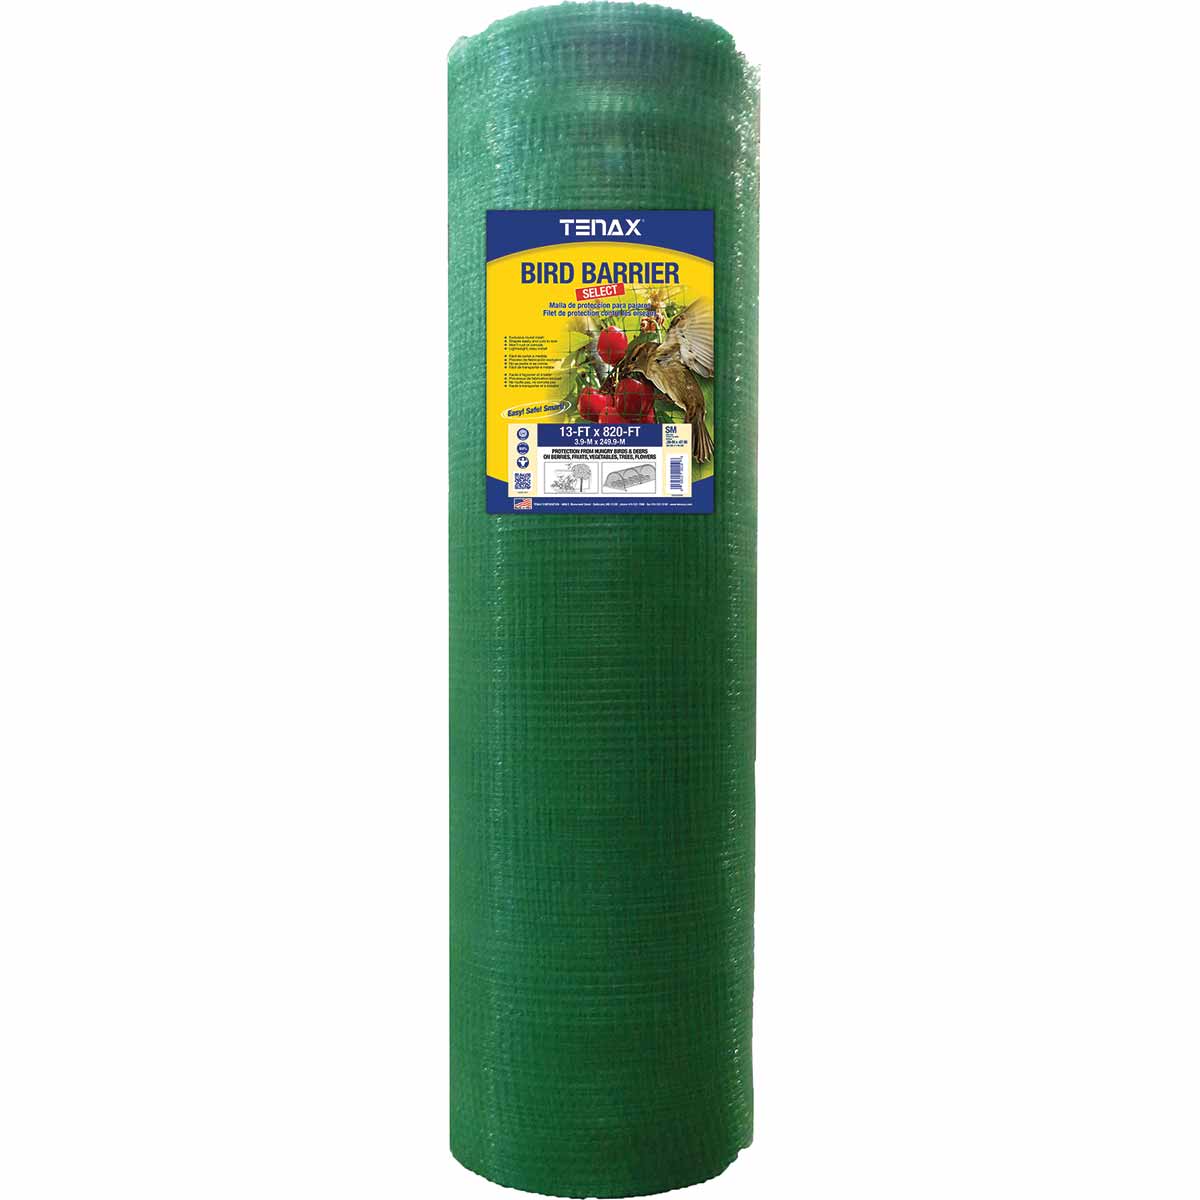 Tenax Bird Barrier Select Fencing SM 13-ft x 820-ft